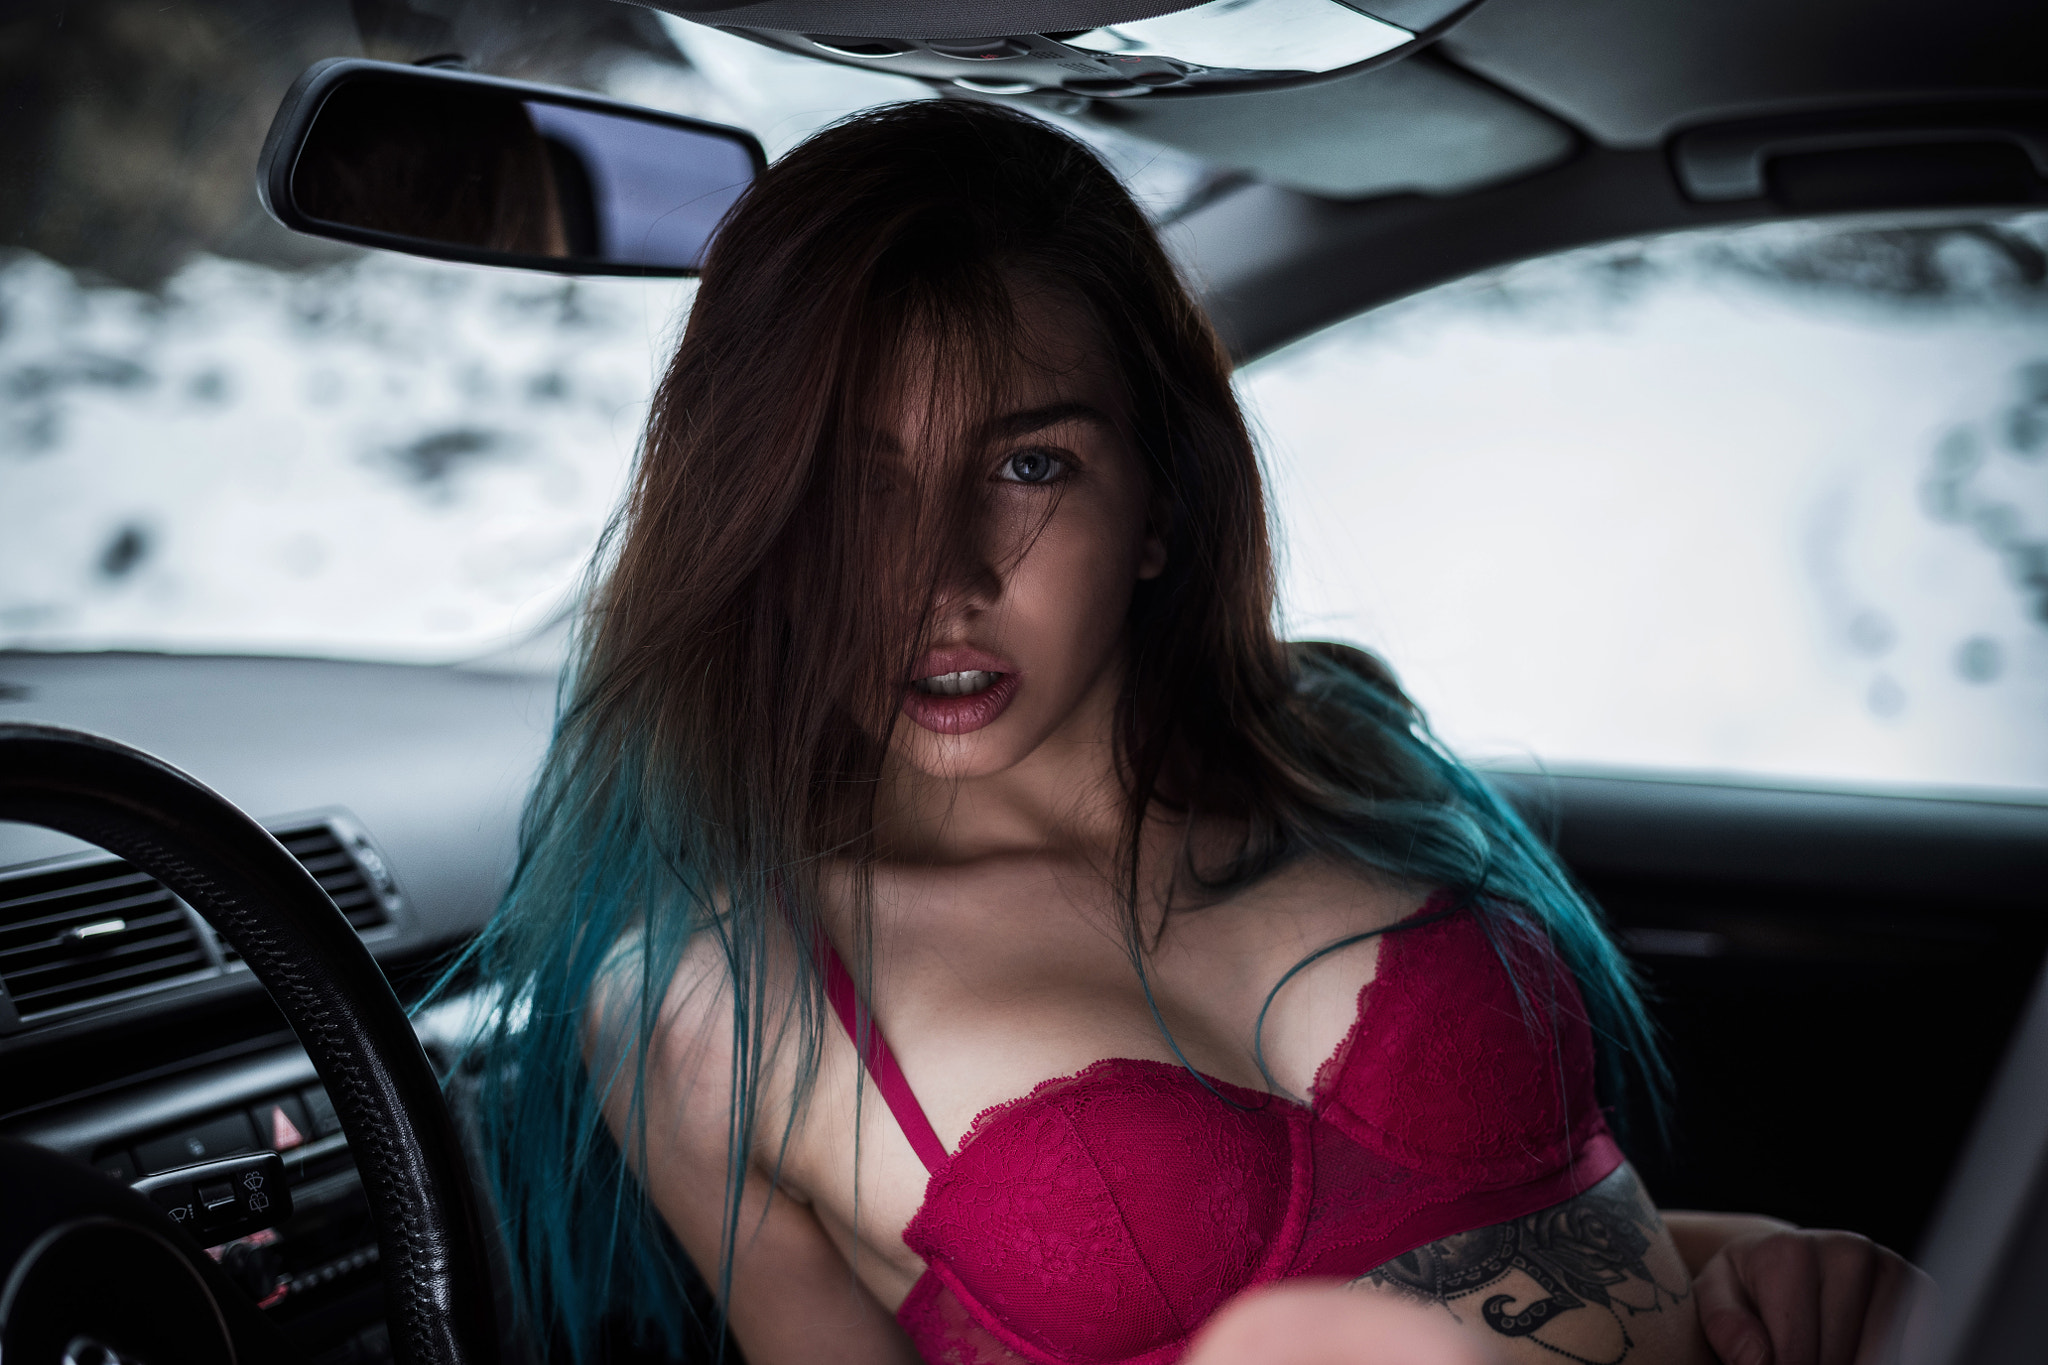 People 2048x1365 women hair in face bra tattoo lingerie dyed hair portrait women with cars car interior